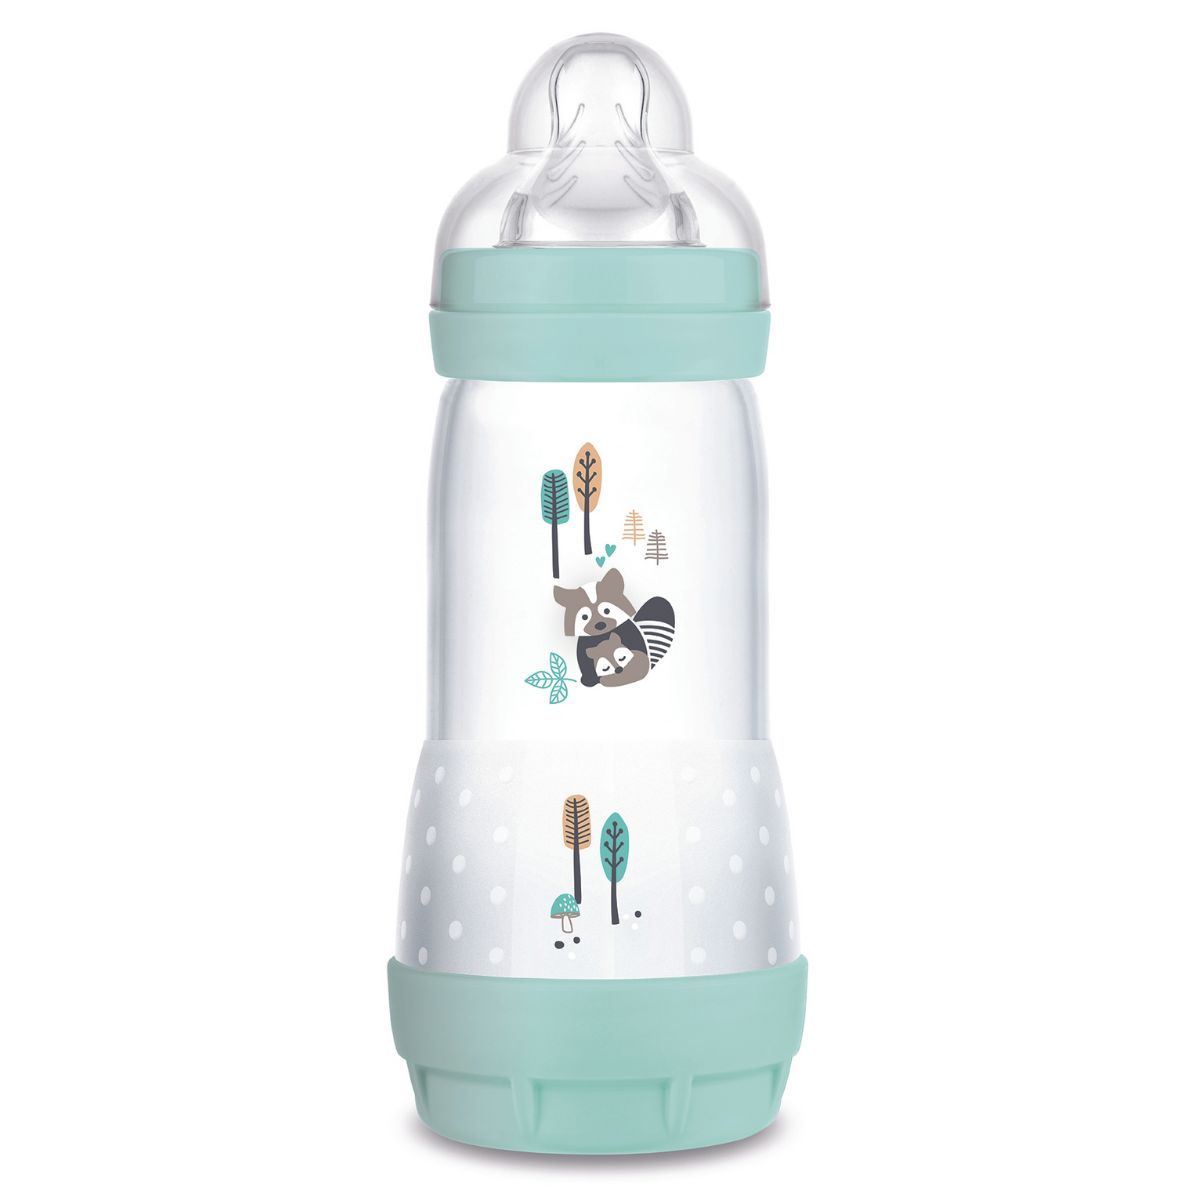 Easy Start™ Anti-Colic 320ml Colors of Nature